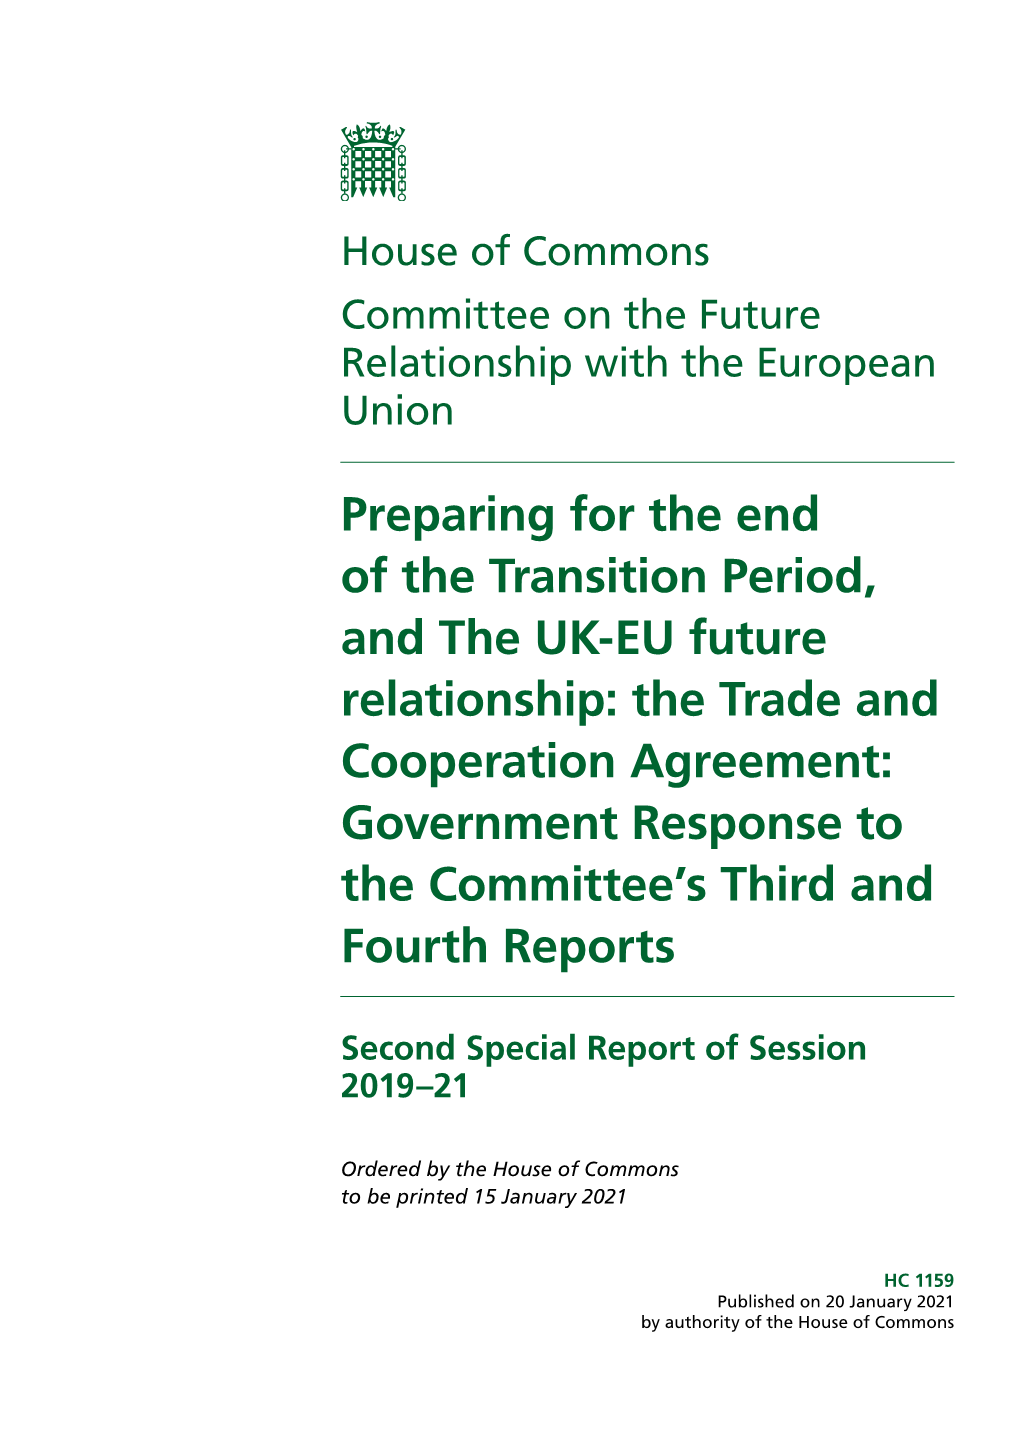 Preparing for the End of the Transition Period, and the UK